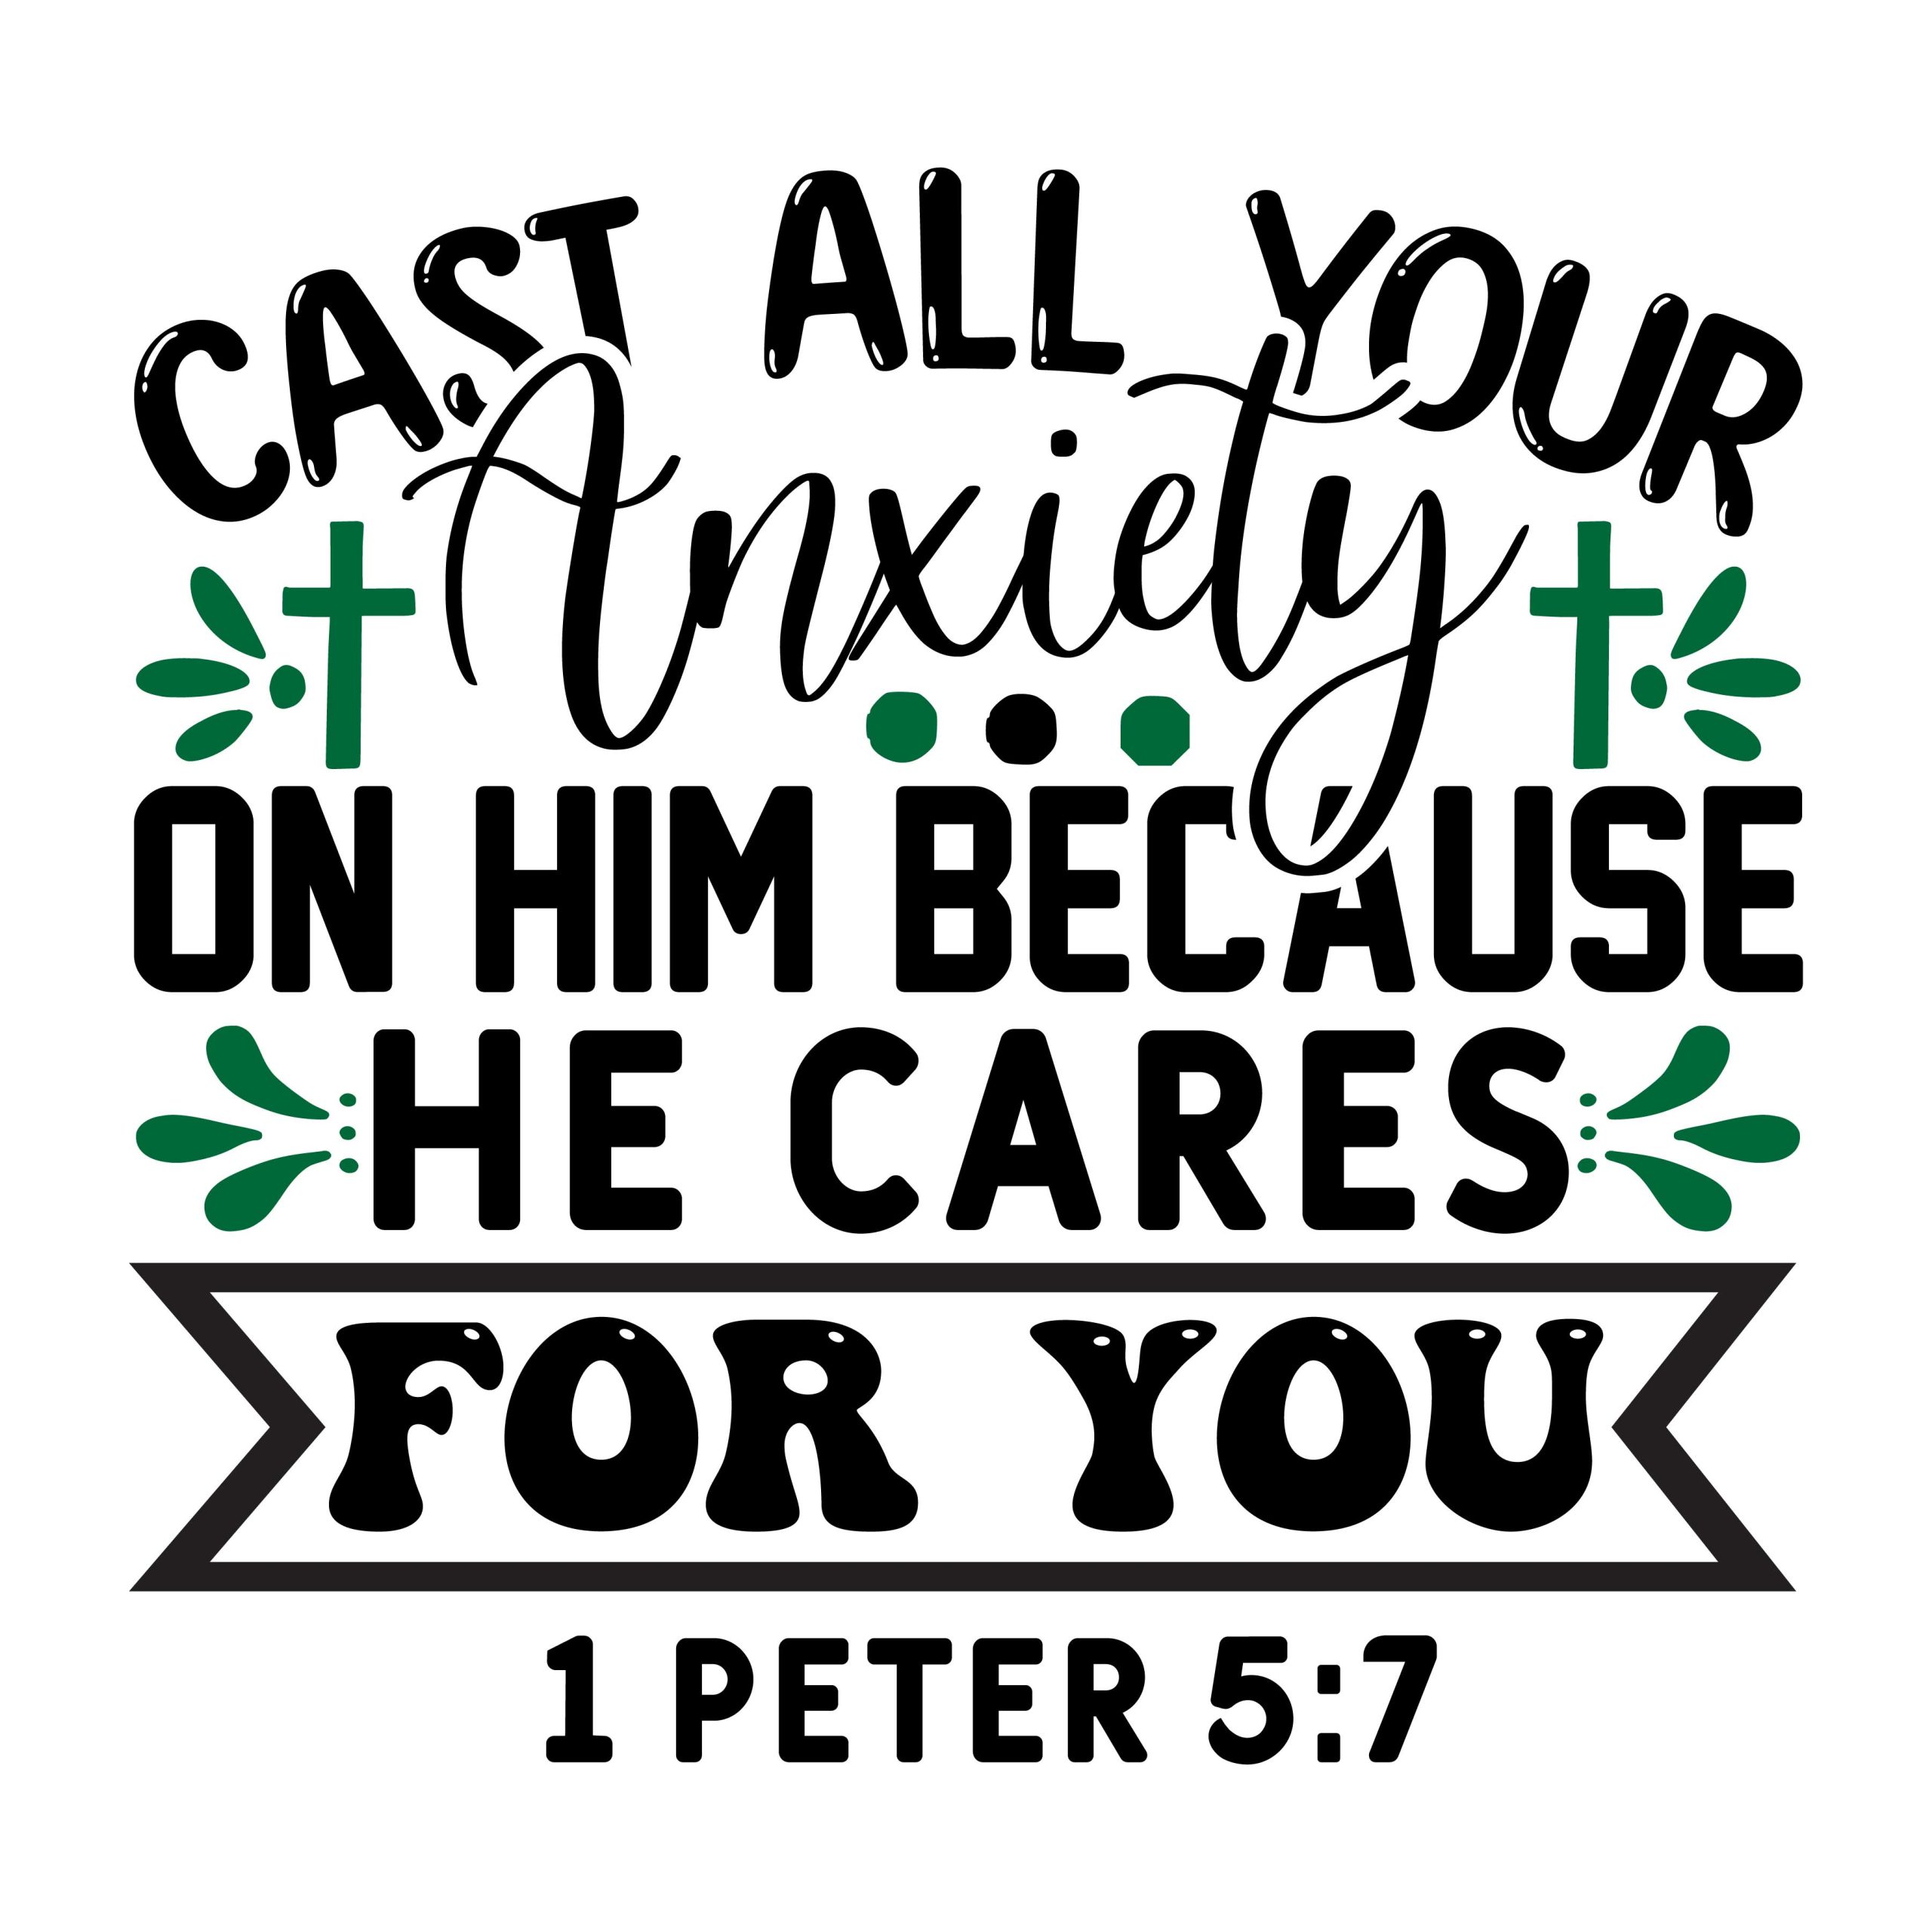 Cast all your anxiety on him because he cares for you 1 Peter 5:7, bible verses, scripture verses, svg files, passages, sayings, cricut designs, silhouette, embroidery, bundle, free cut files, design space, vector